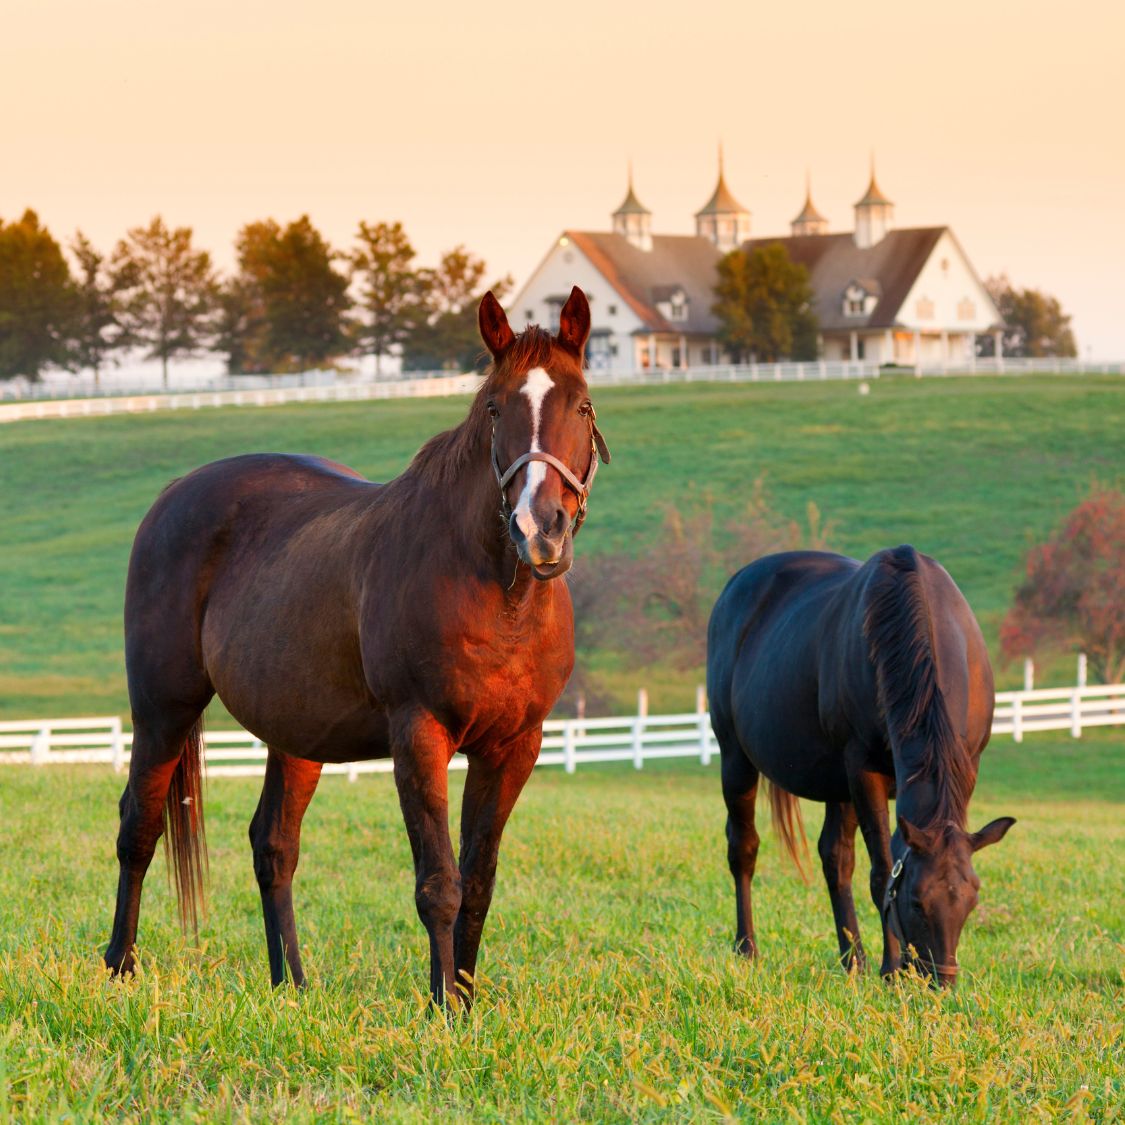 The Best Jobs You Can Get Related to Horses